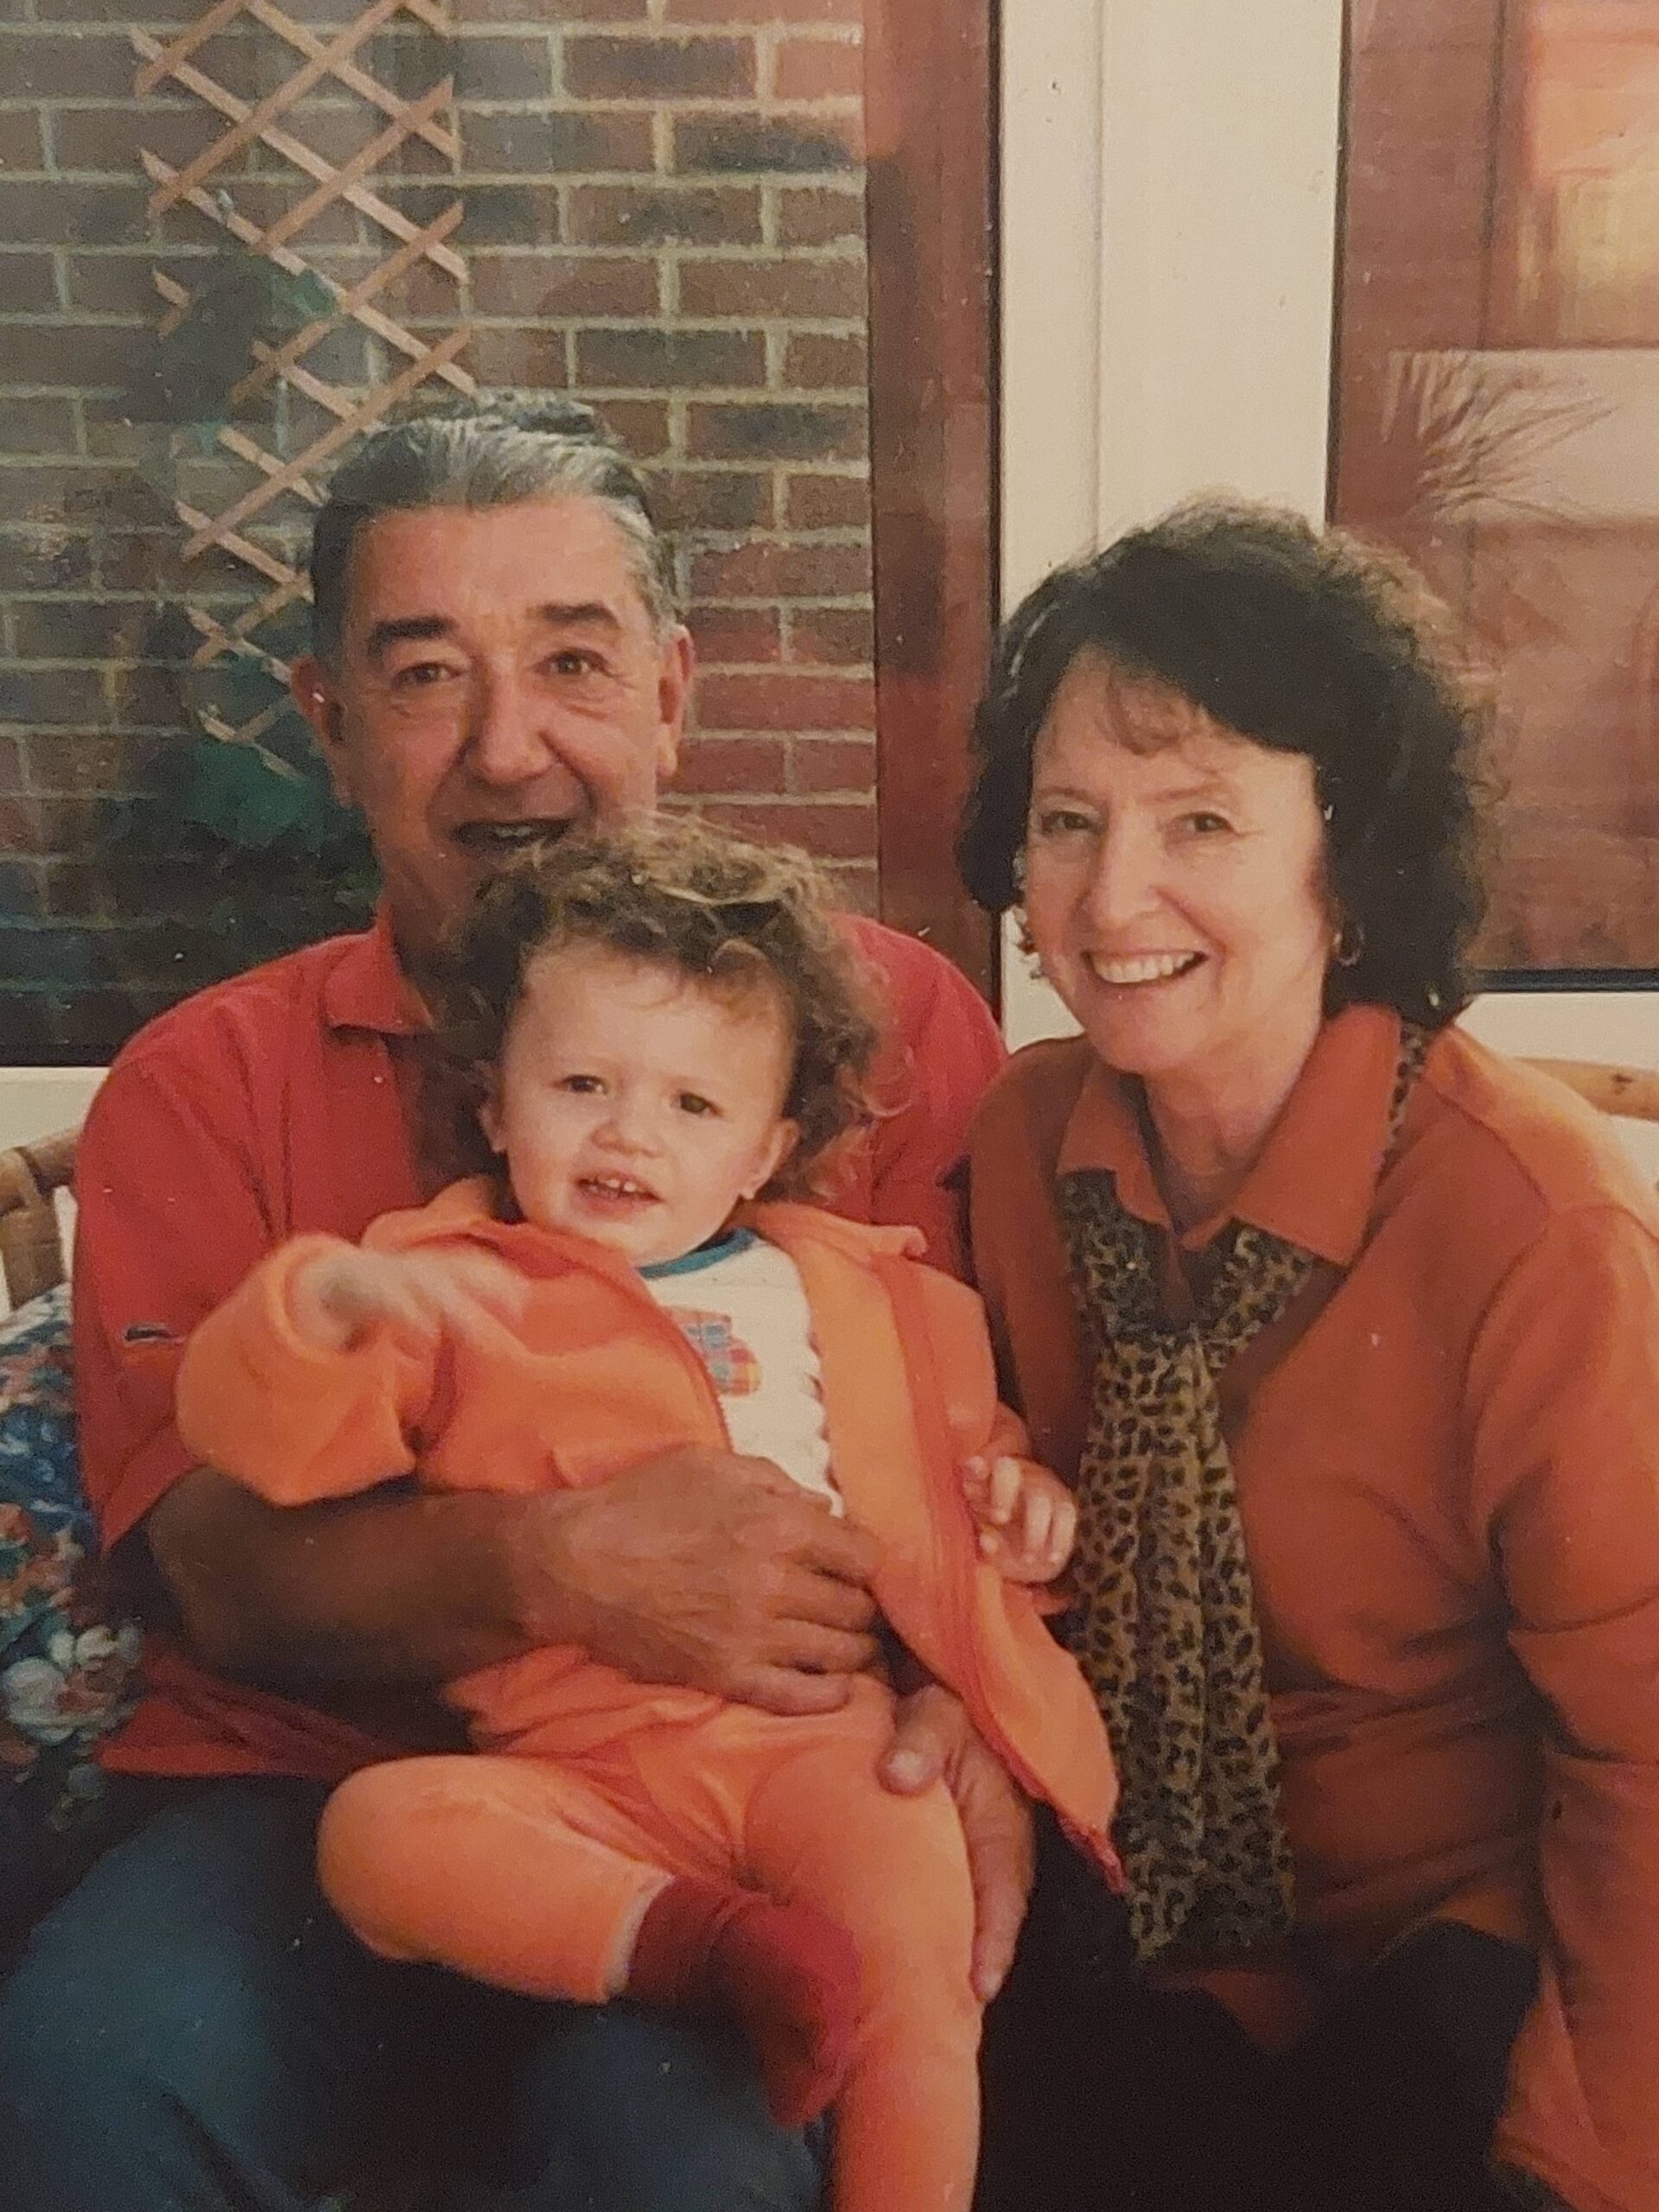 A picture of Hope Bullen with her Grandparents when she was a toddler. She has curly dark blonde hair, and they are all wearing orange. Her Grandad has dark hair and is greying at the front, her Nan has brunette hair, they are sitting in a conservatory.